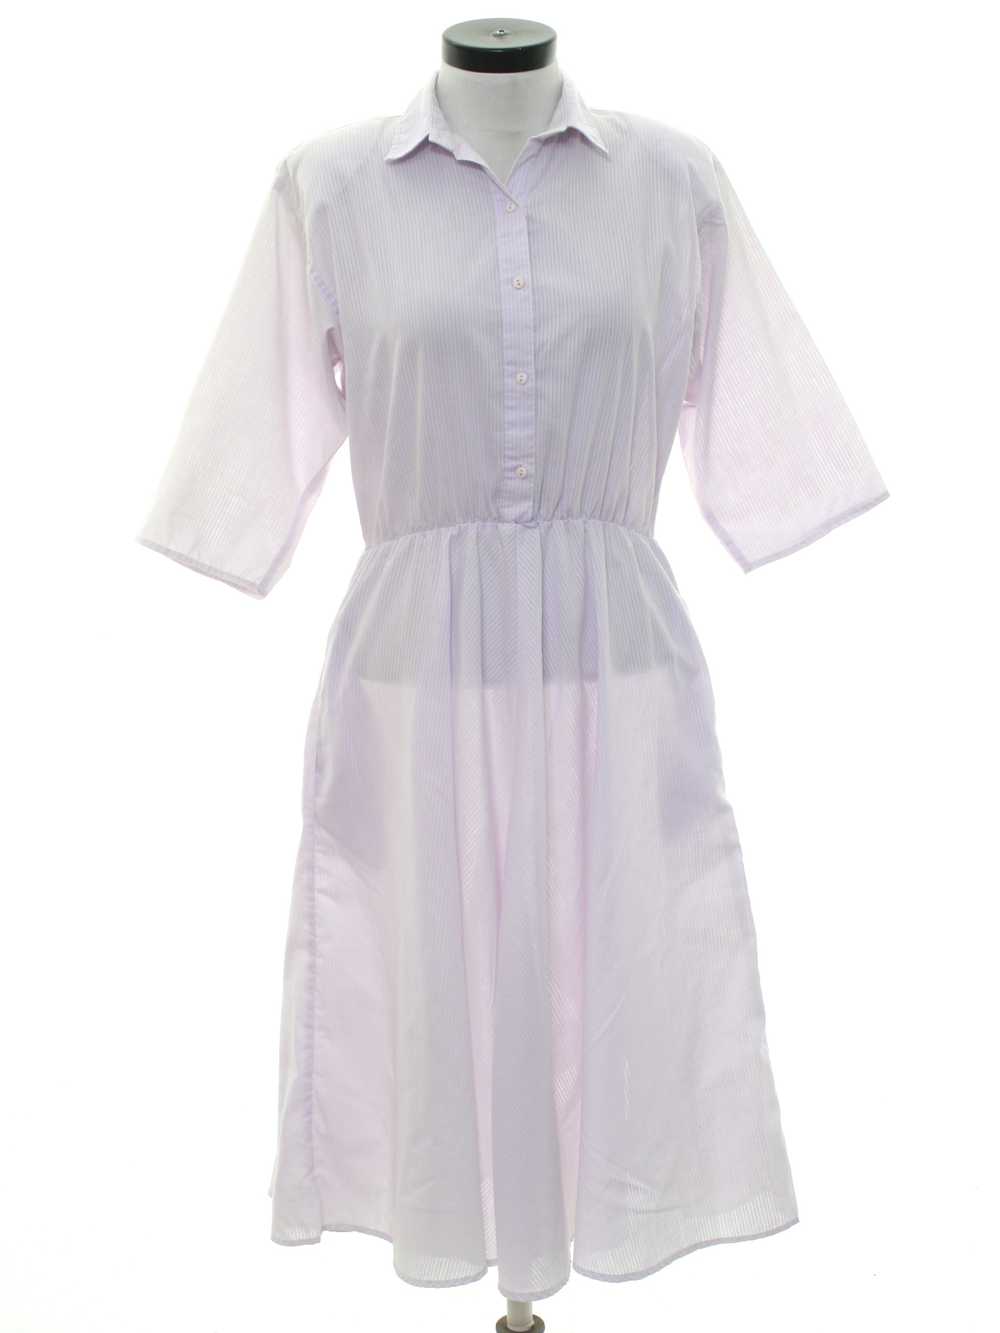 1980's Rhymes Totally 80s Secretary Dress - image 1